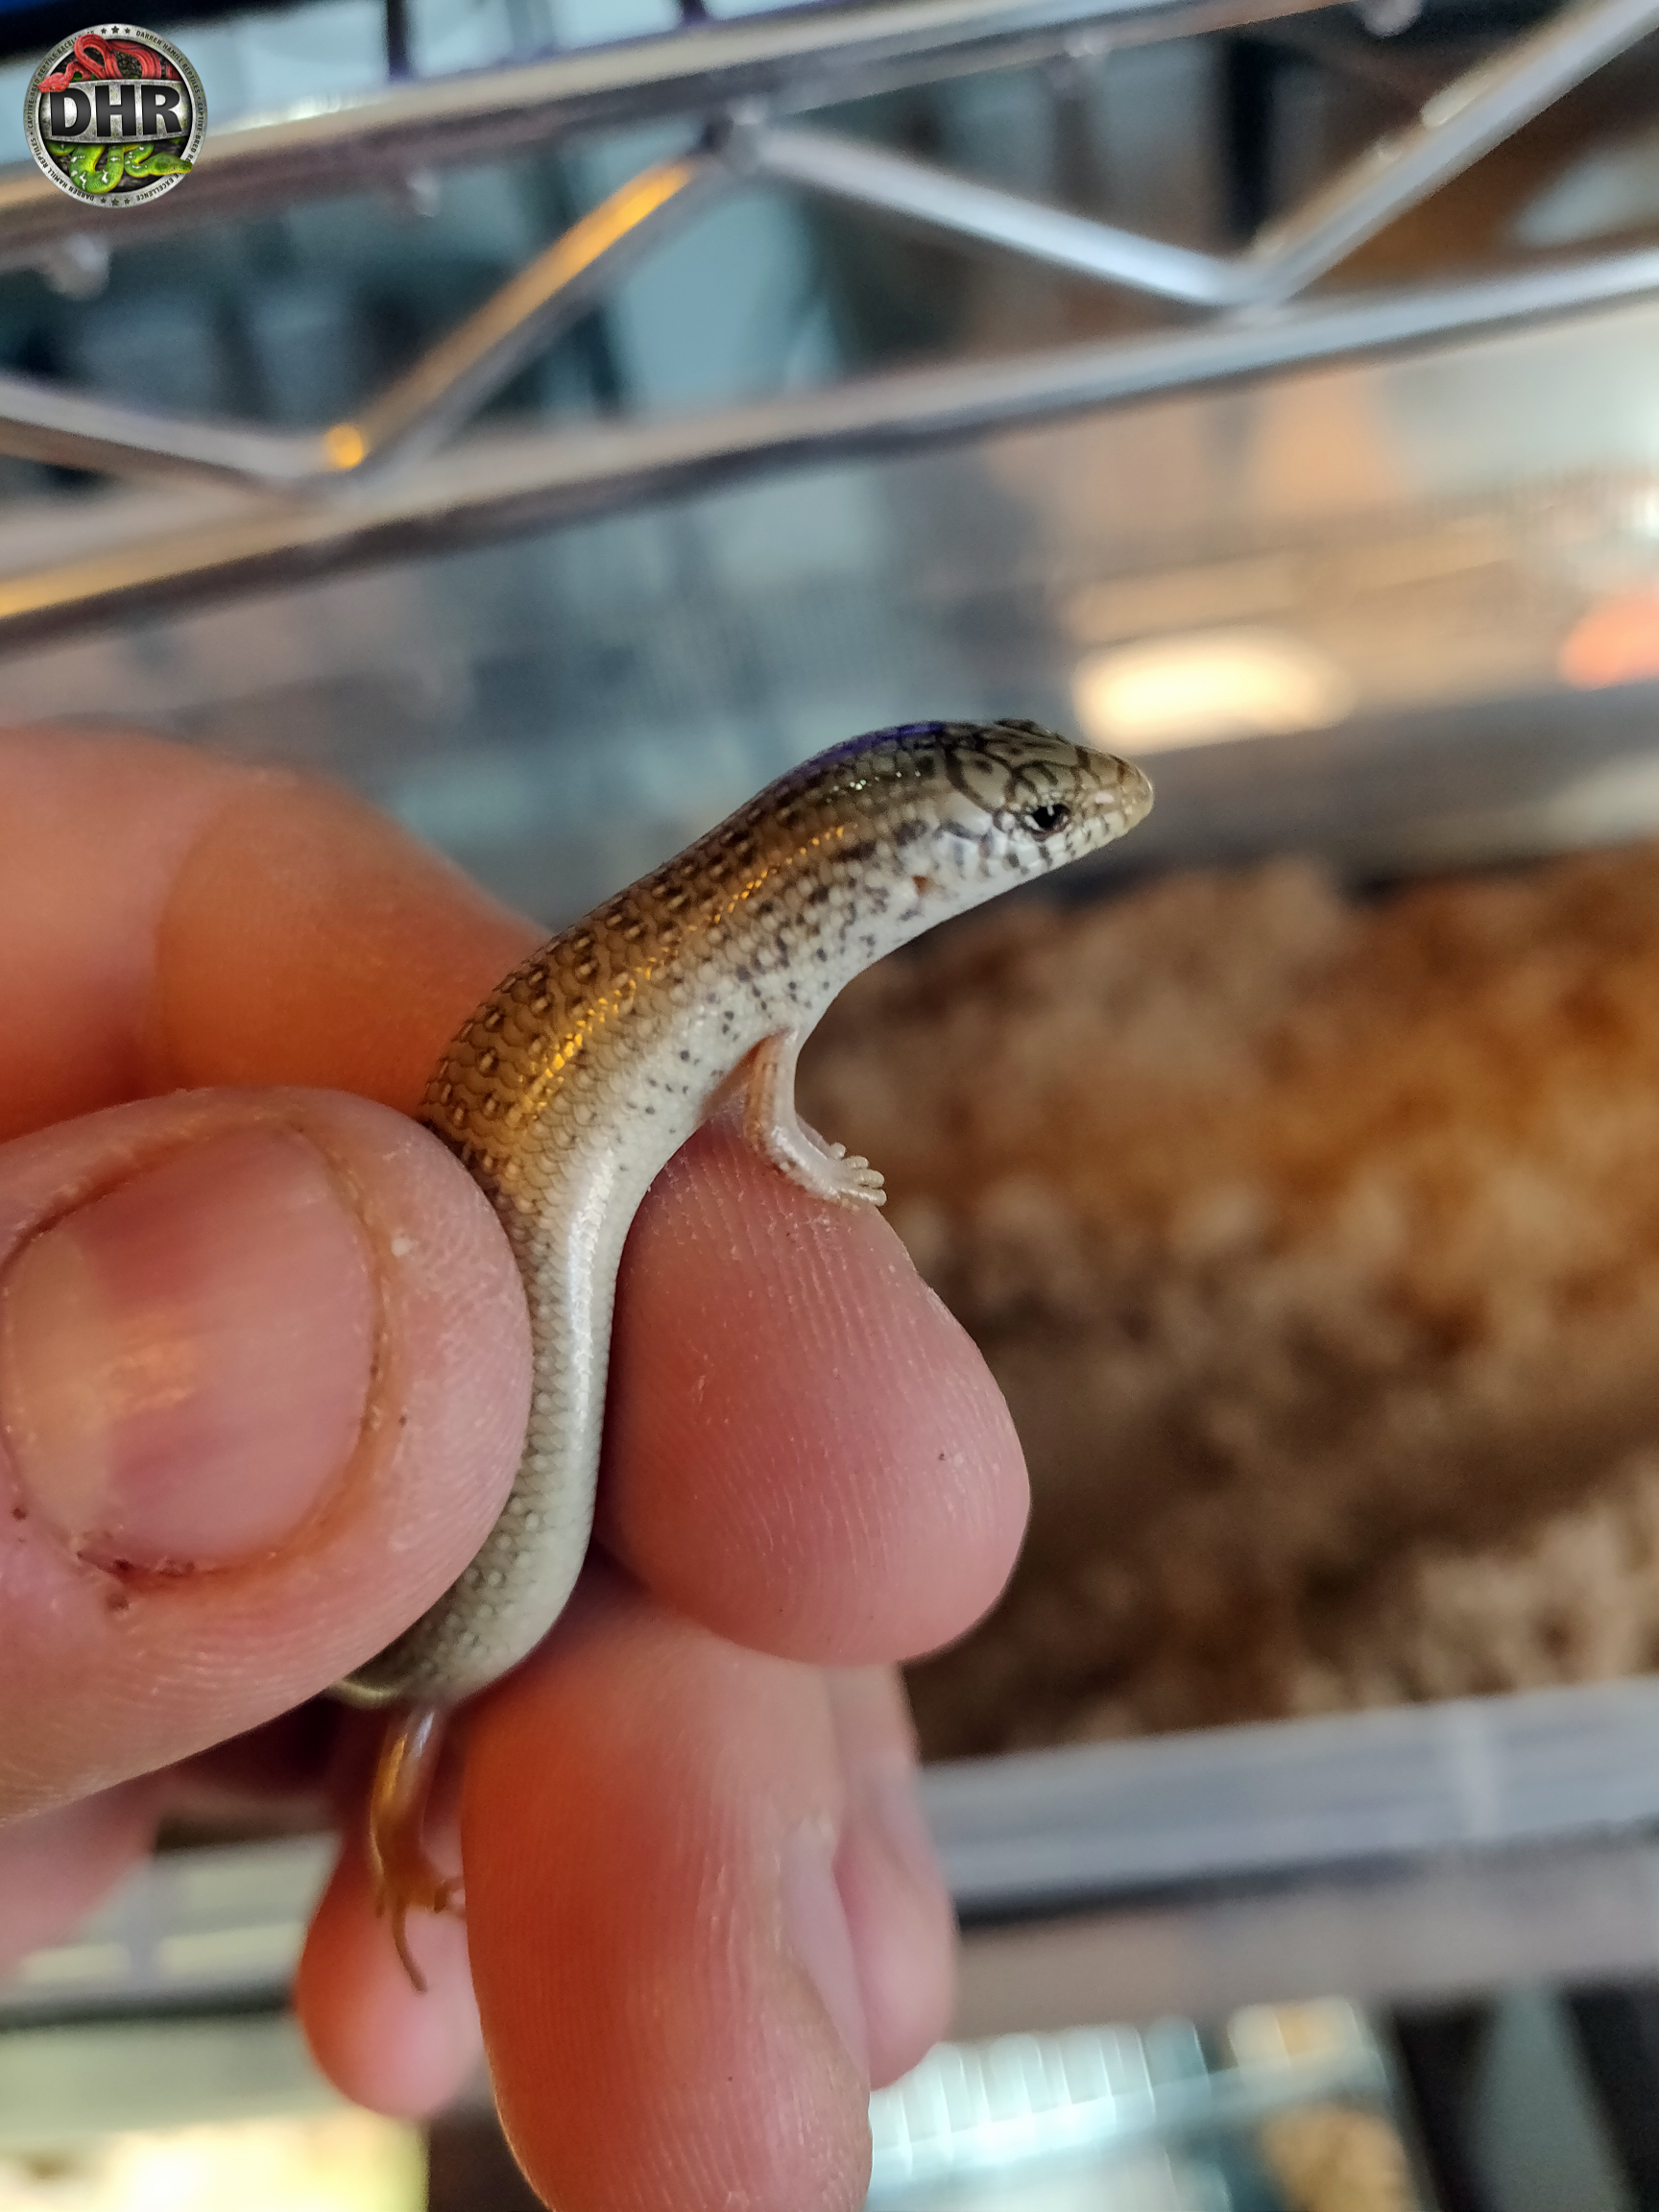 Our Ocellated Skinks are growing up!